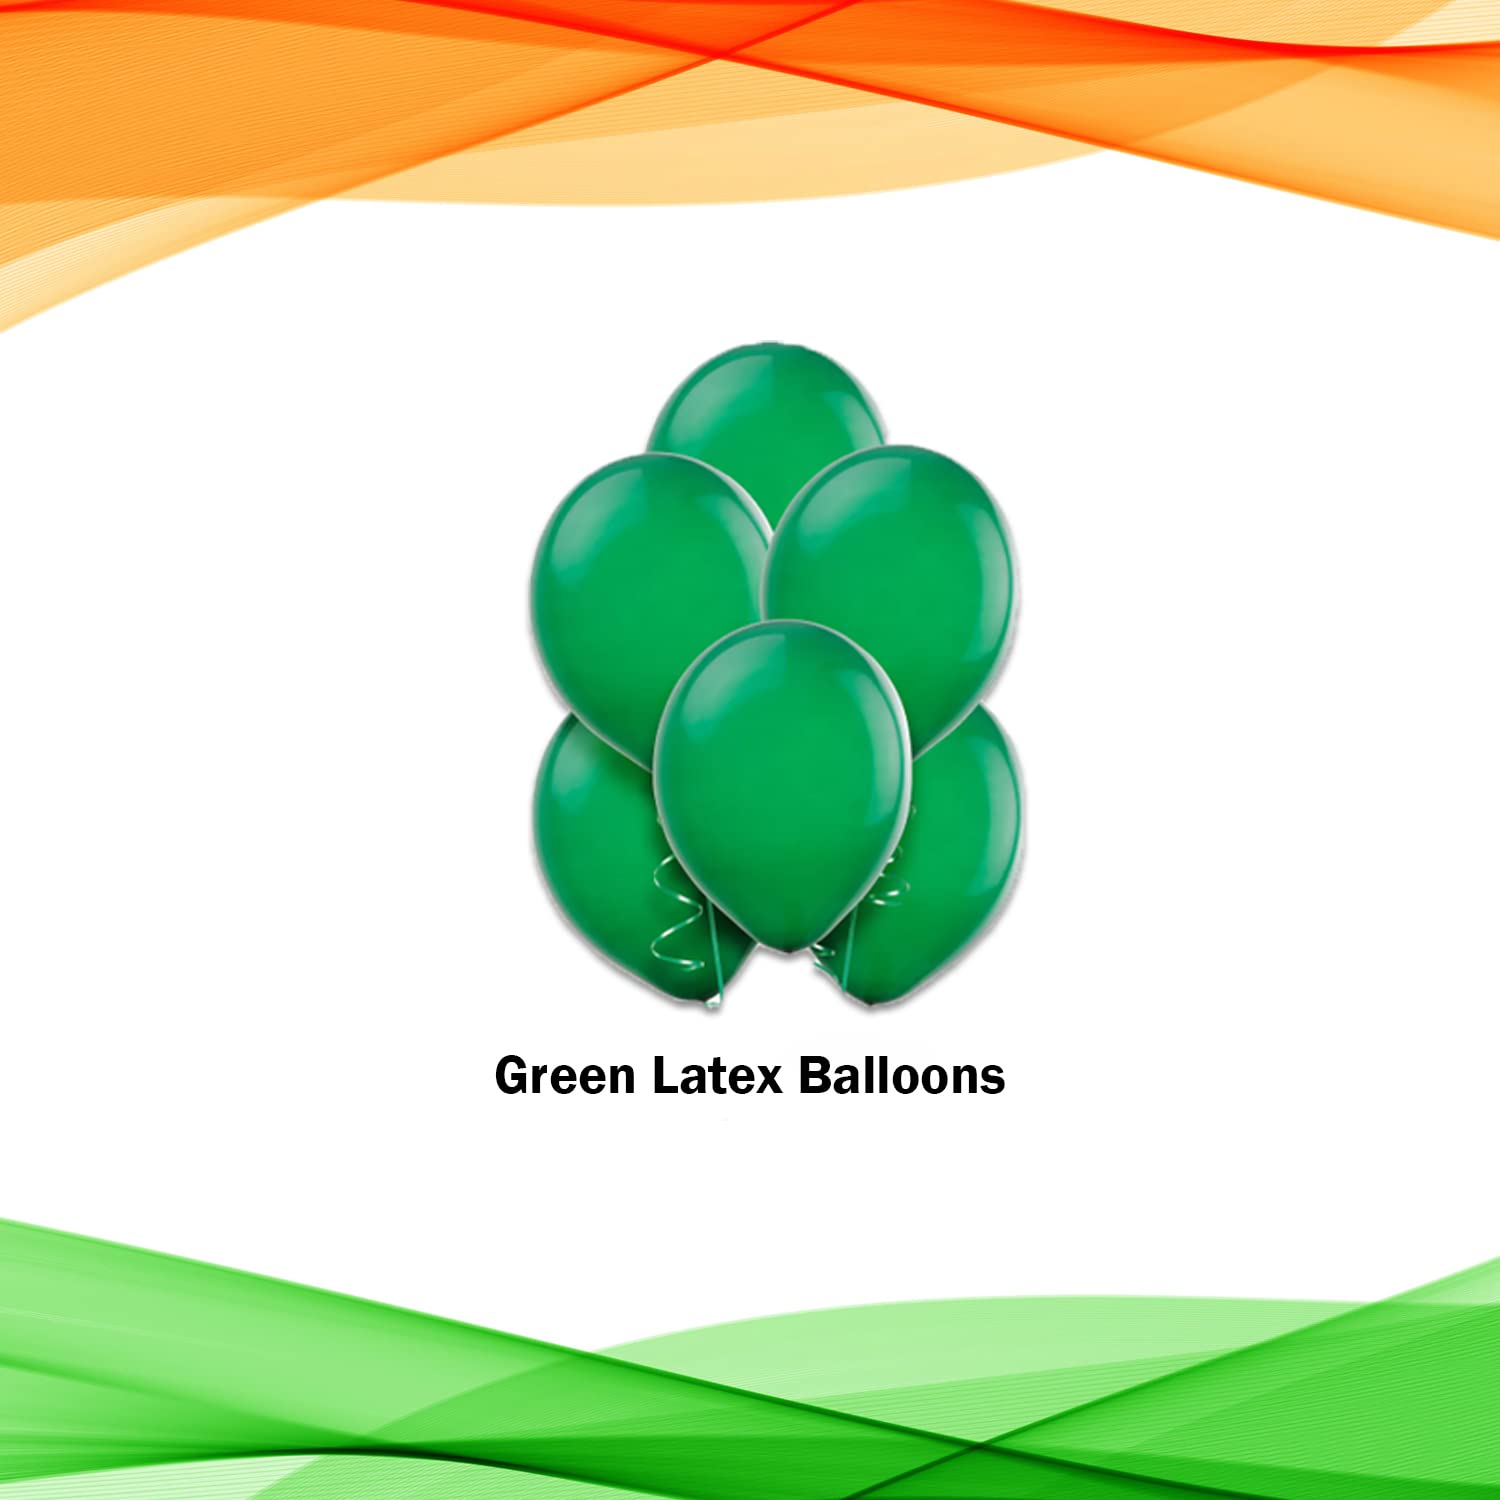 26 January Decoration Items - Pack of 41 Pcs - Letter Foil & Latex balloons - Tricolour Balloons - CherishX Partystore